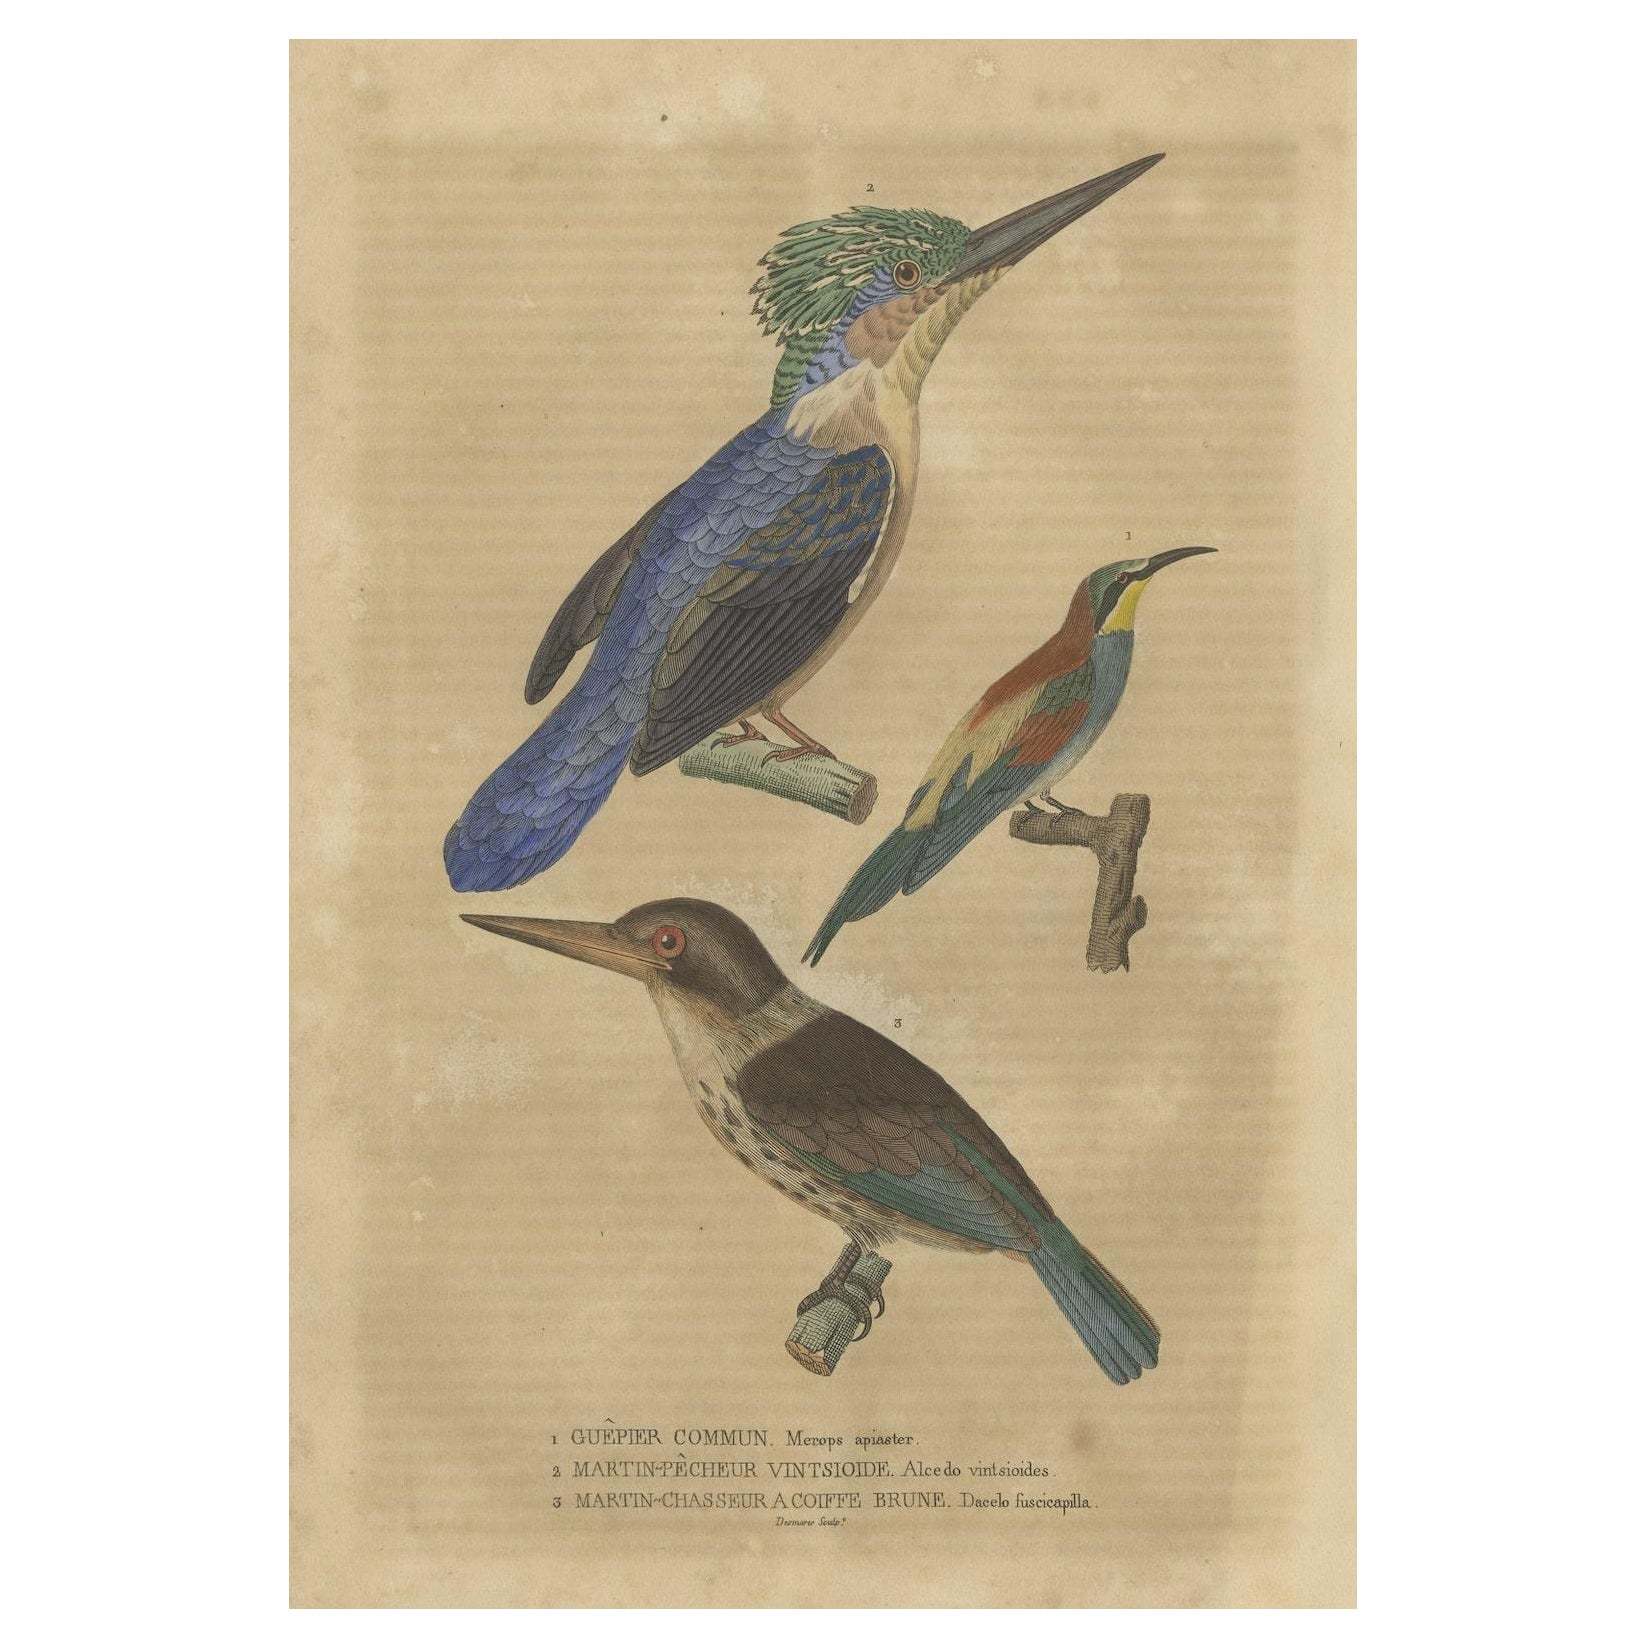 Old Bird Print of a Bee-Eater, a Common Kingfisher and a Brown-hooded Kingfisher